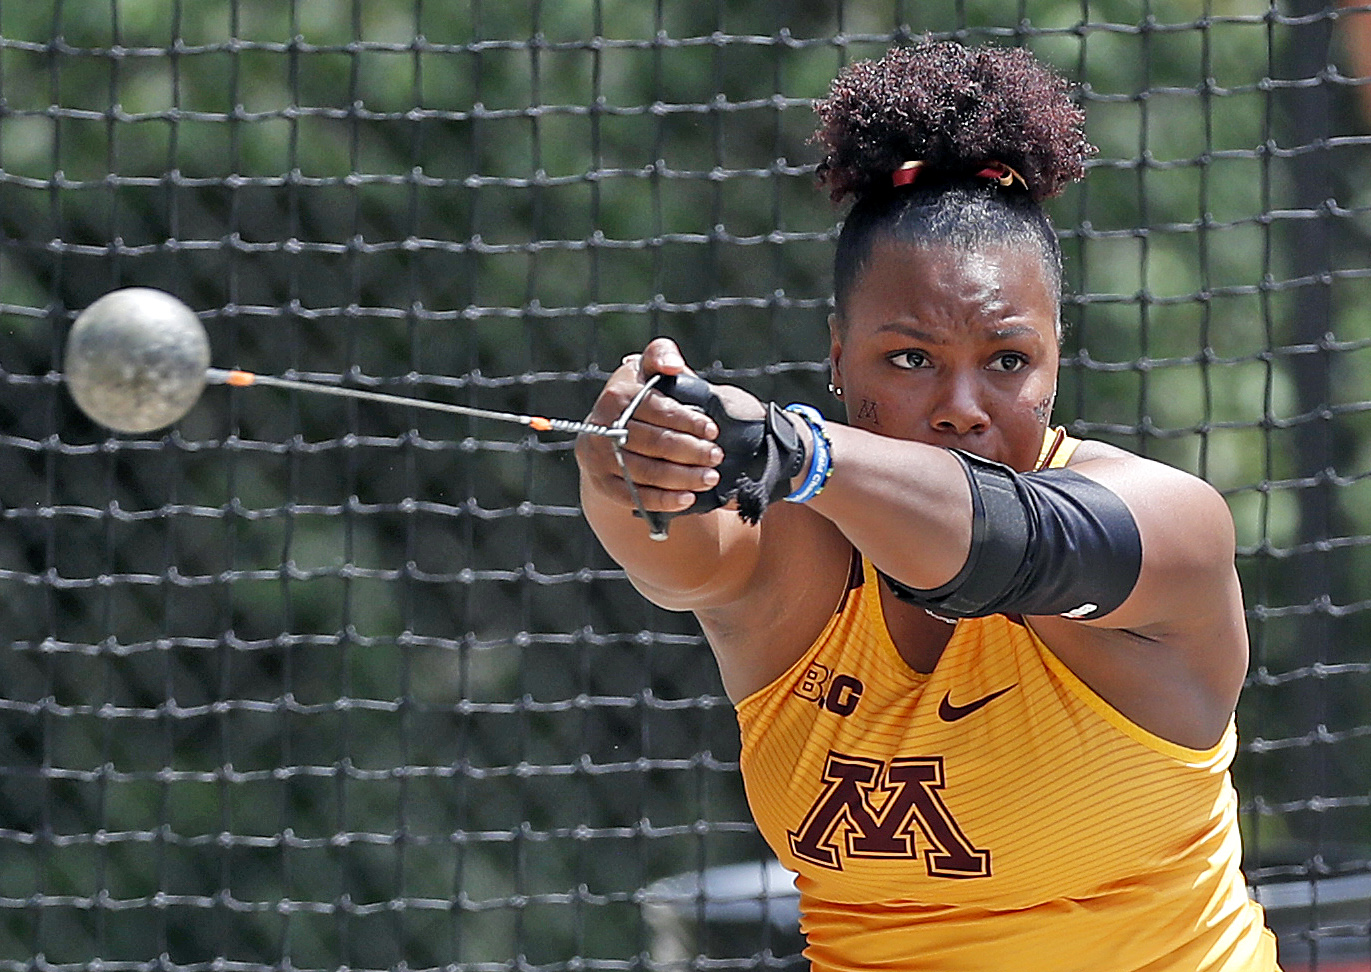 Nayoka Clunis' 20.98m throw gave her third in the women's weight throw event